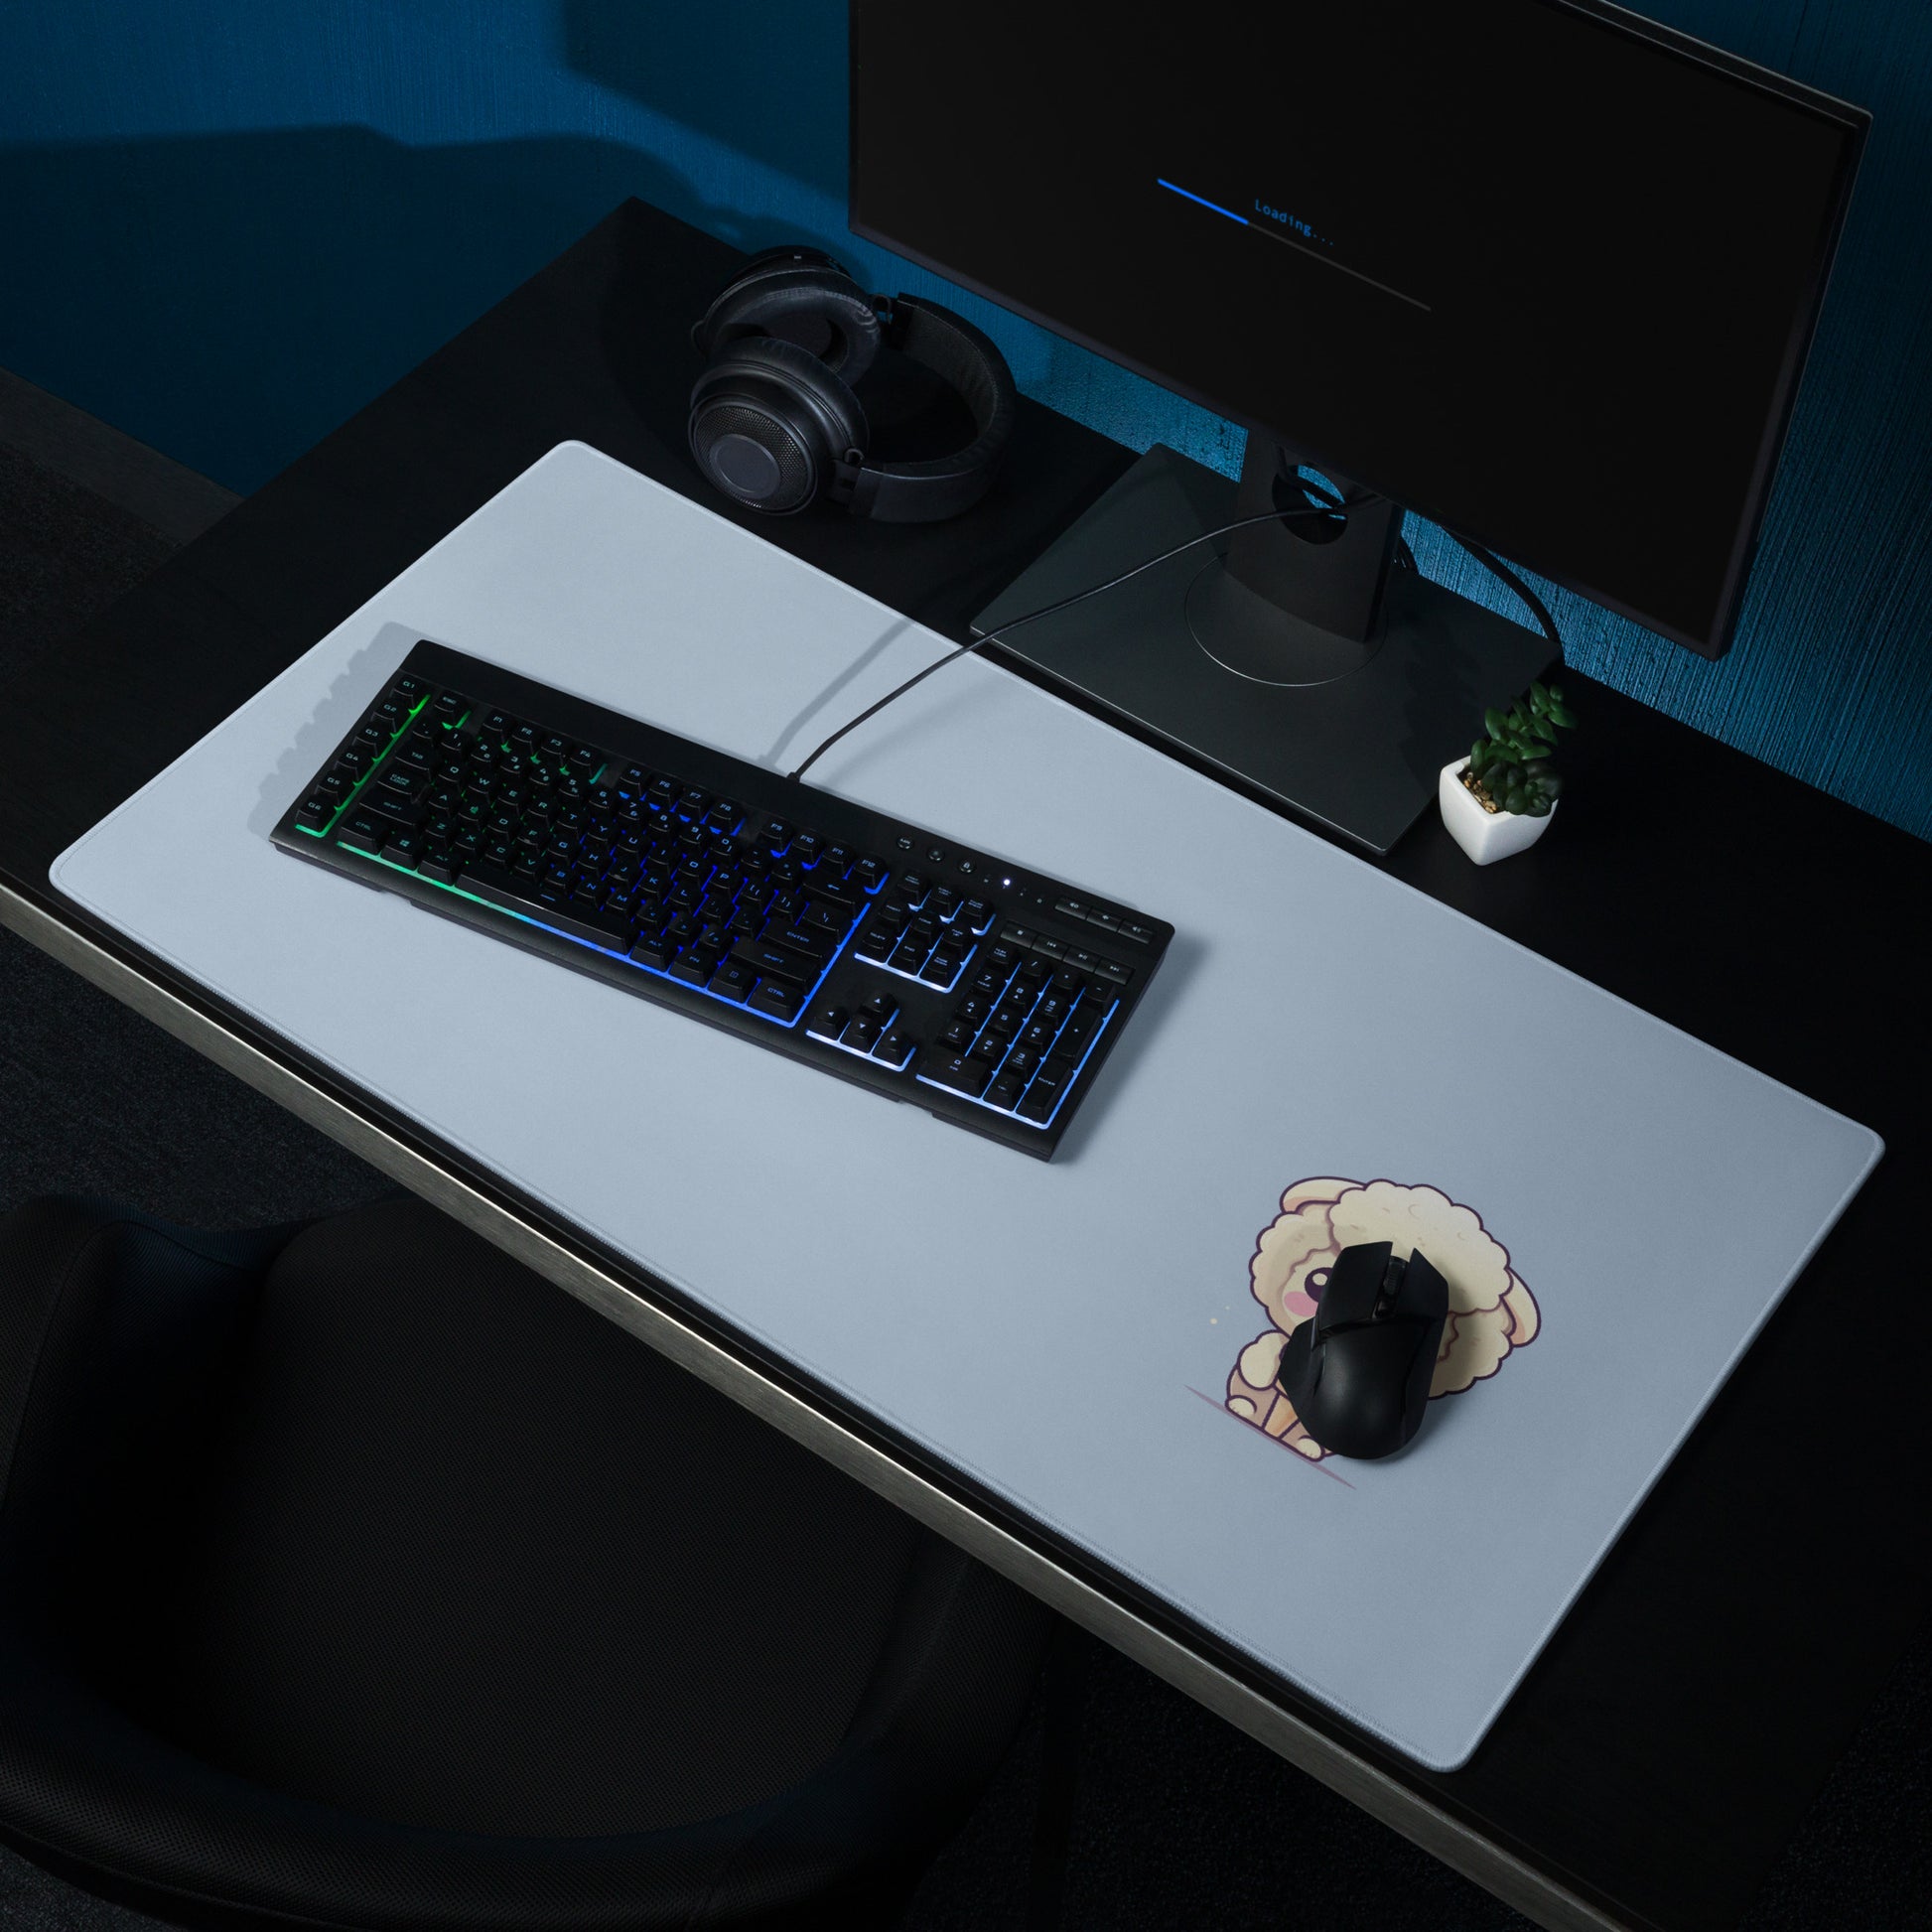 A 36" x 18" desk pad with a cute sheep eating ice cream on it shown on a desk setup. Blue in color.